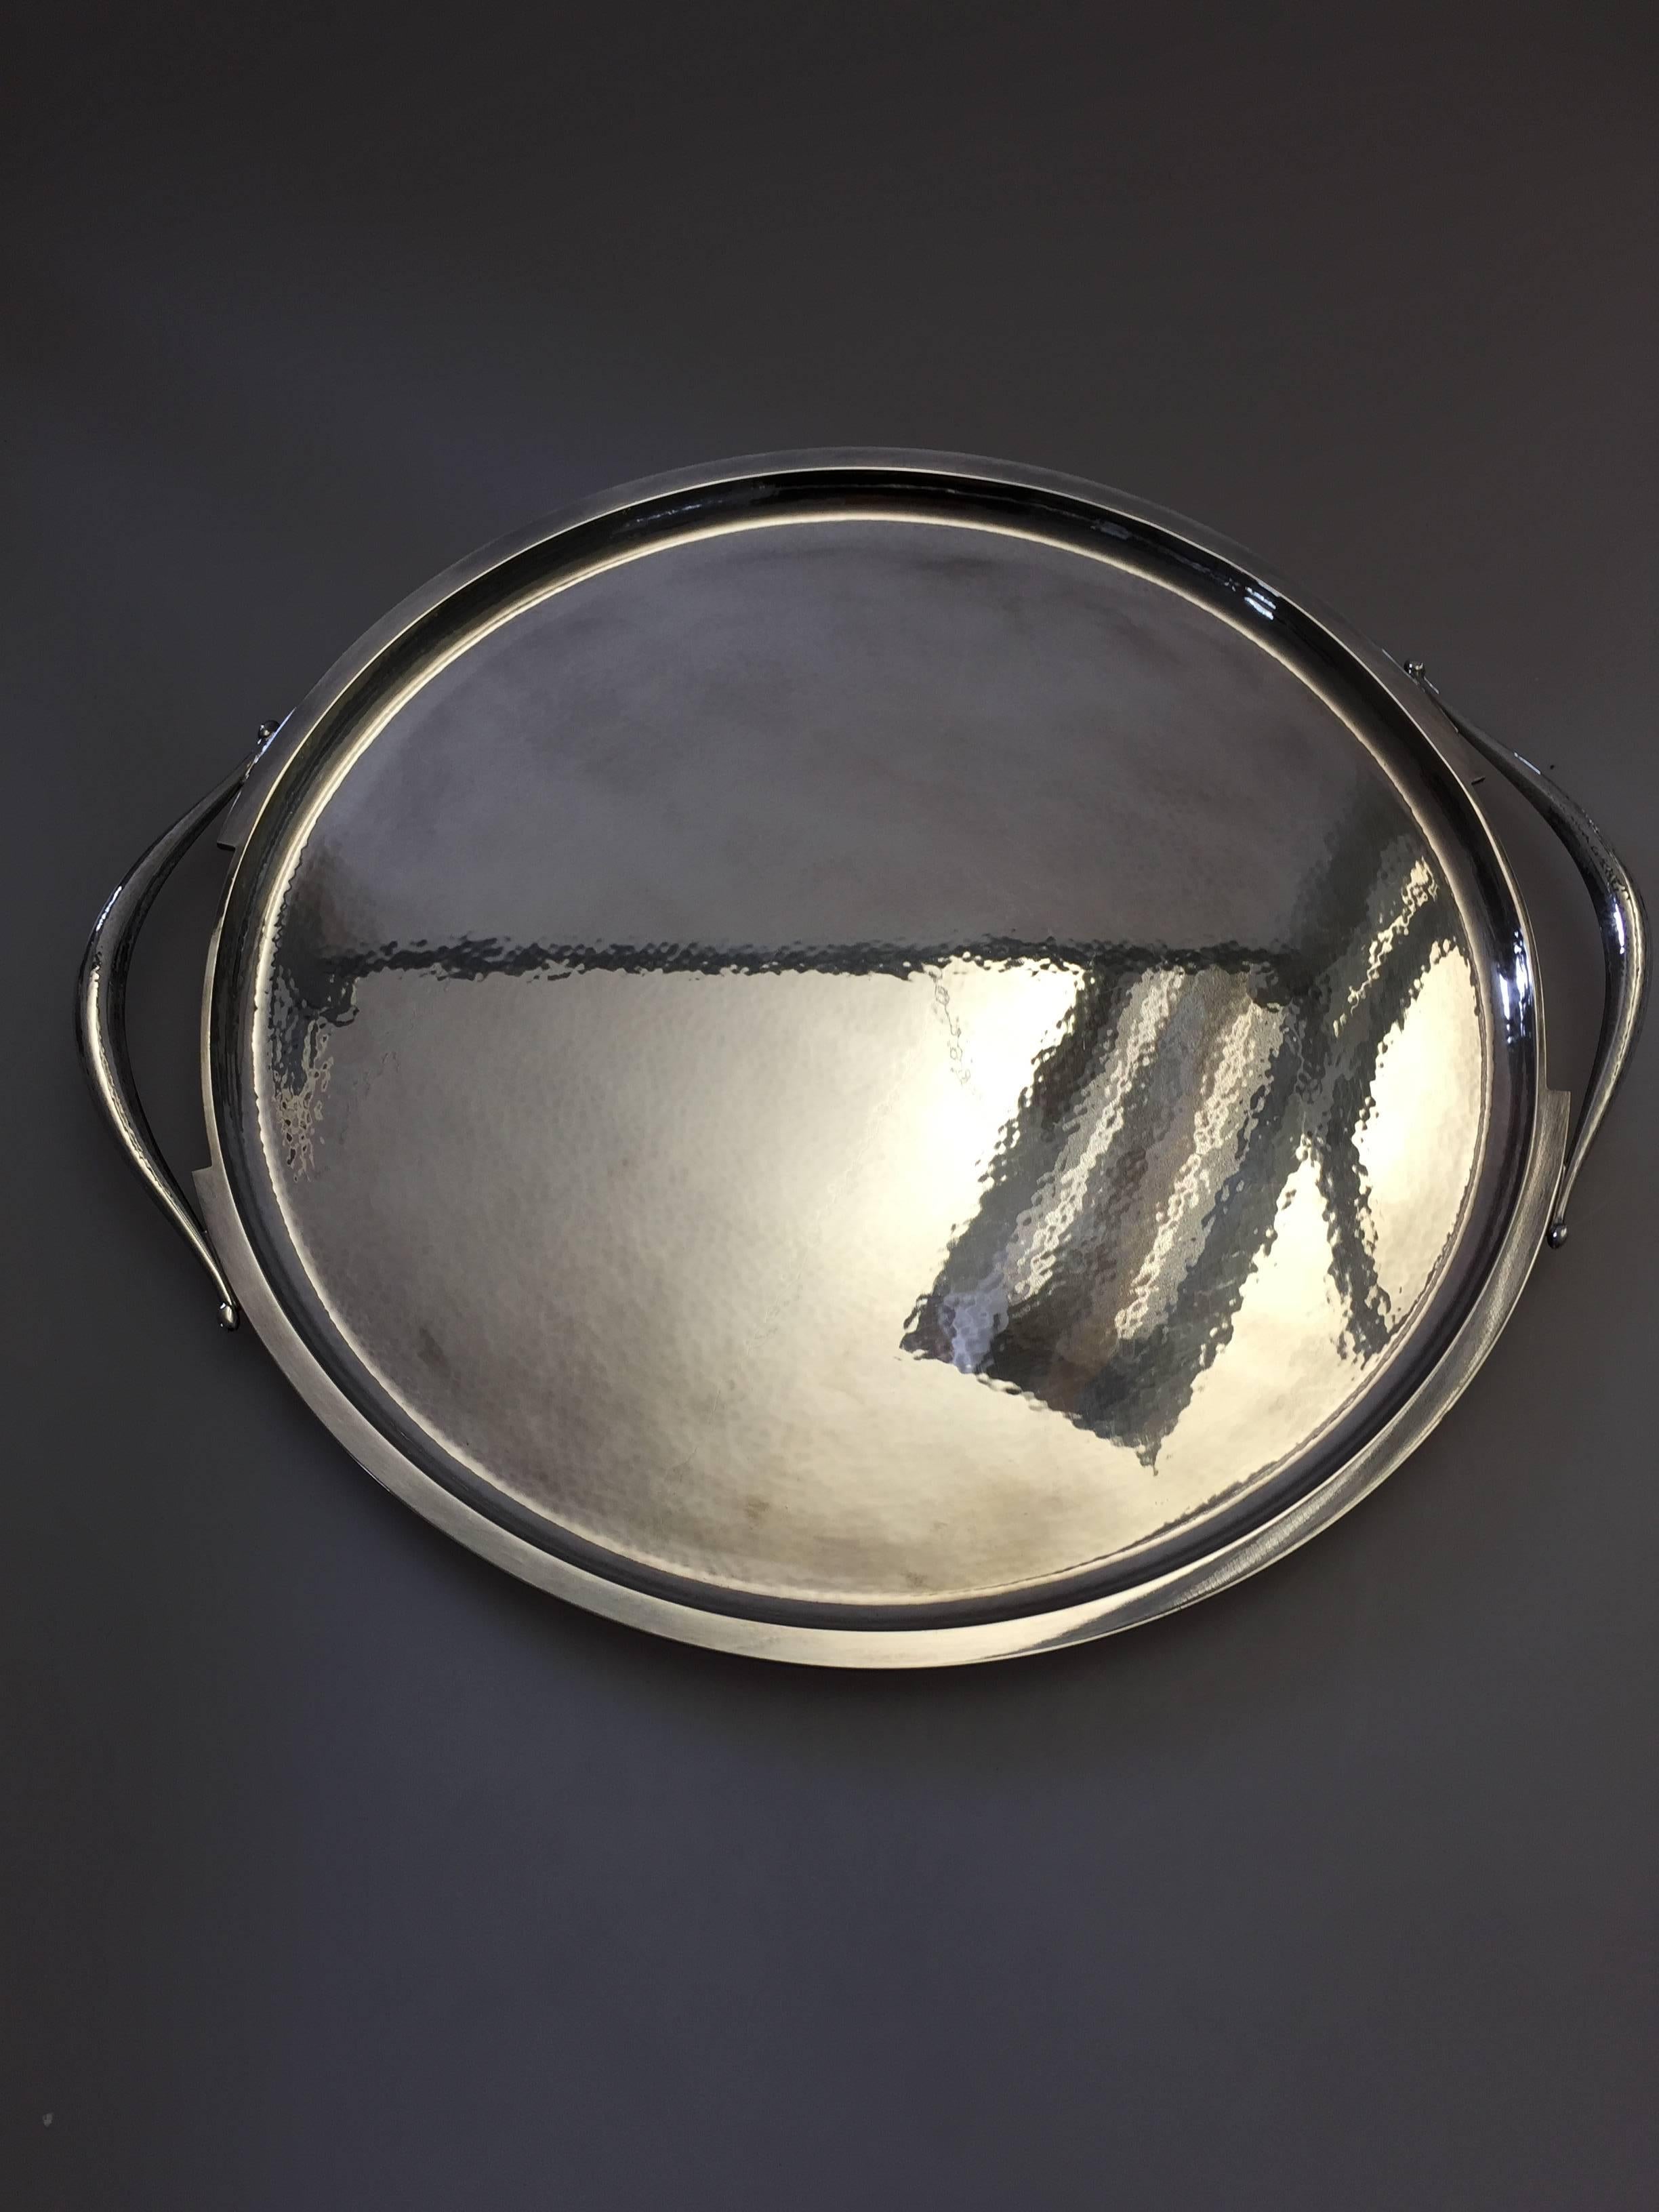 Georg Jensen sterling silver tray with handles #847A designed by Harald Nielsen. The tray measures 38 cm in diameter and is in a good condition. 

Georg Jensen (1866-1935) opened his small silver atelier in Copenhagen, Denmark in 1904. By 1935 the